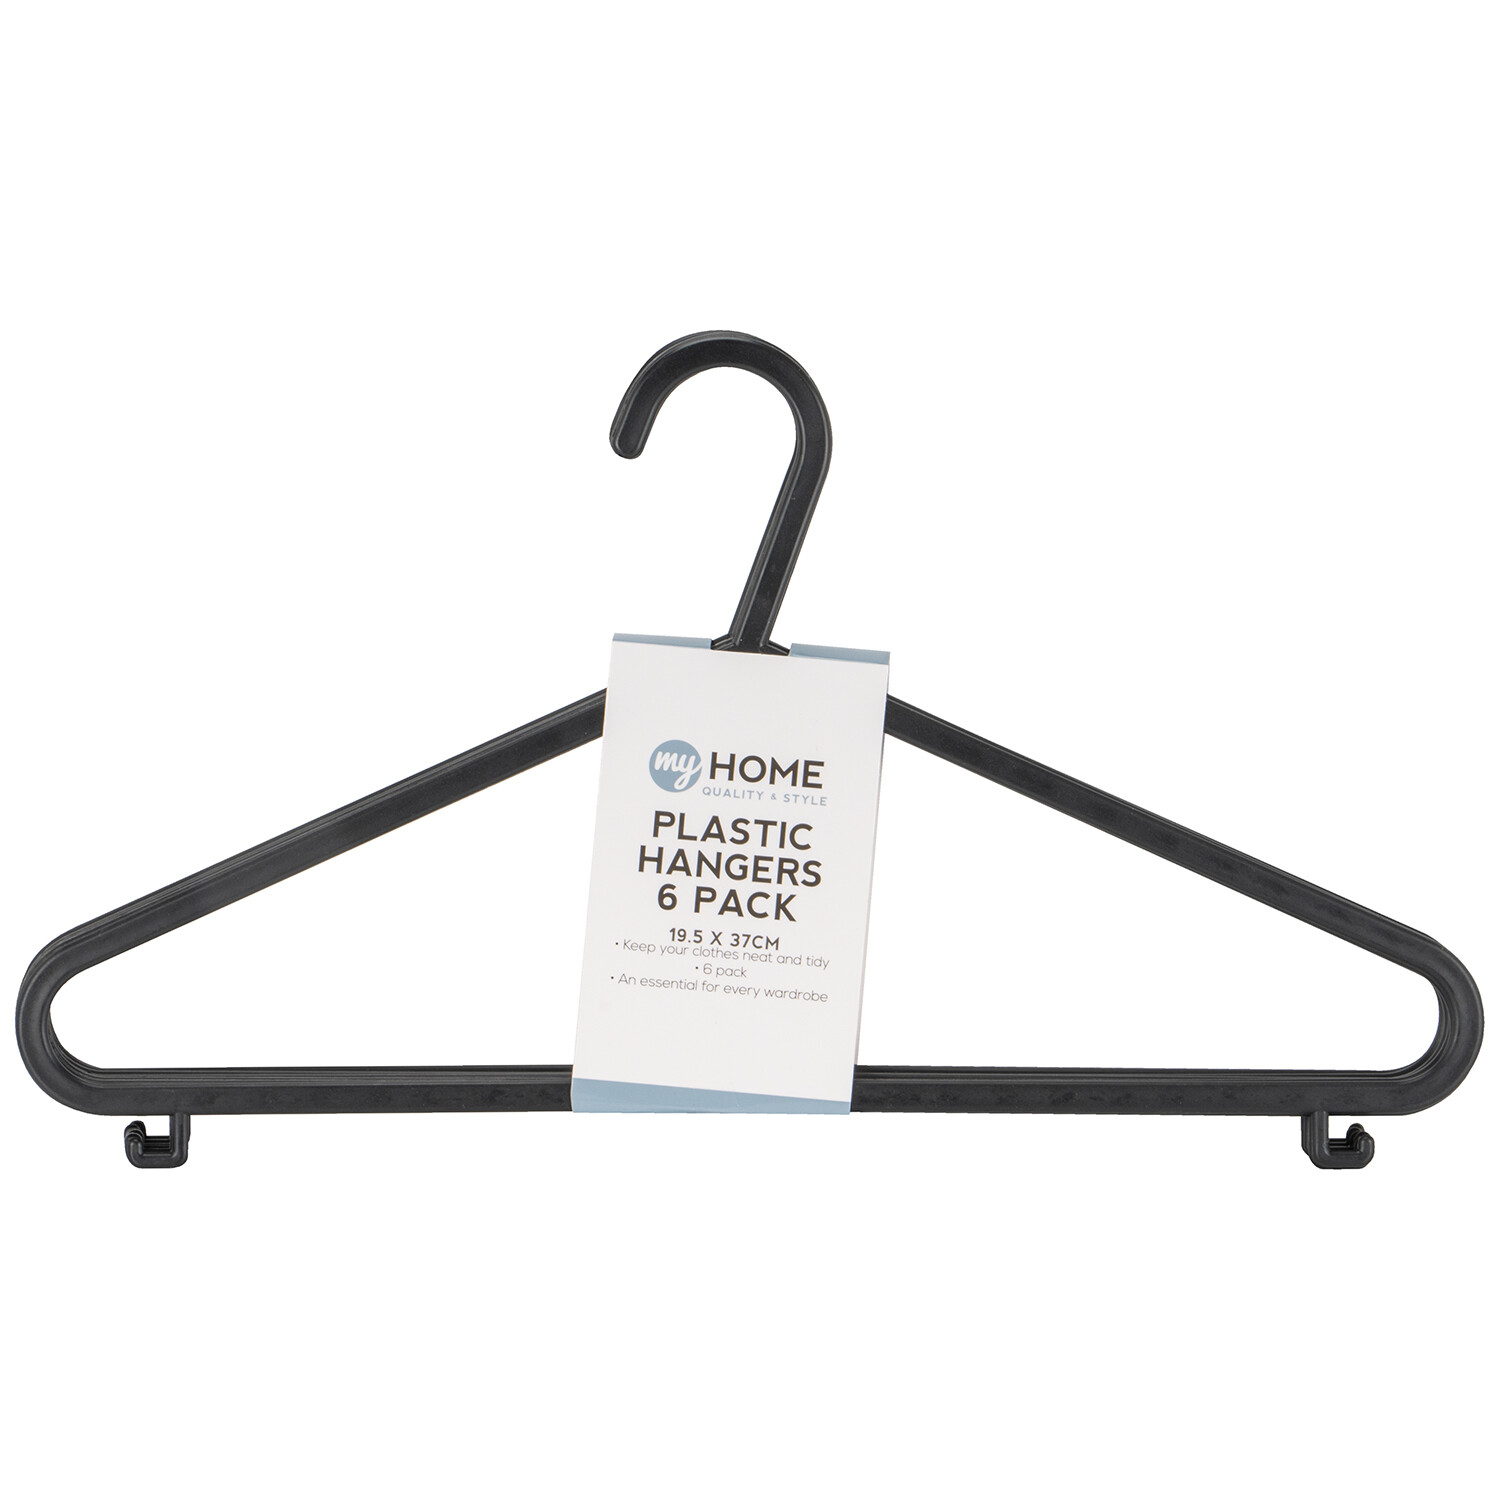 My Home Plastic Hangers 6 Pack Image